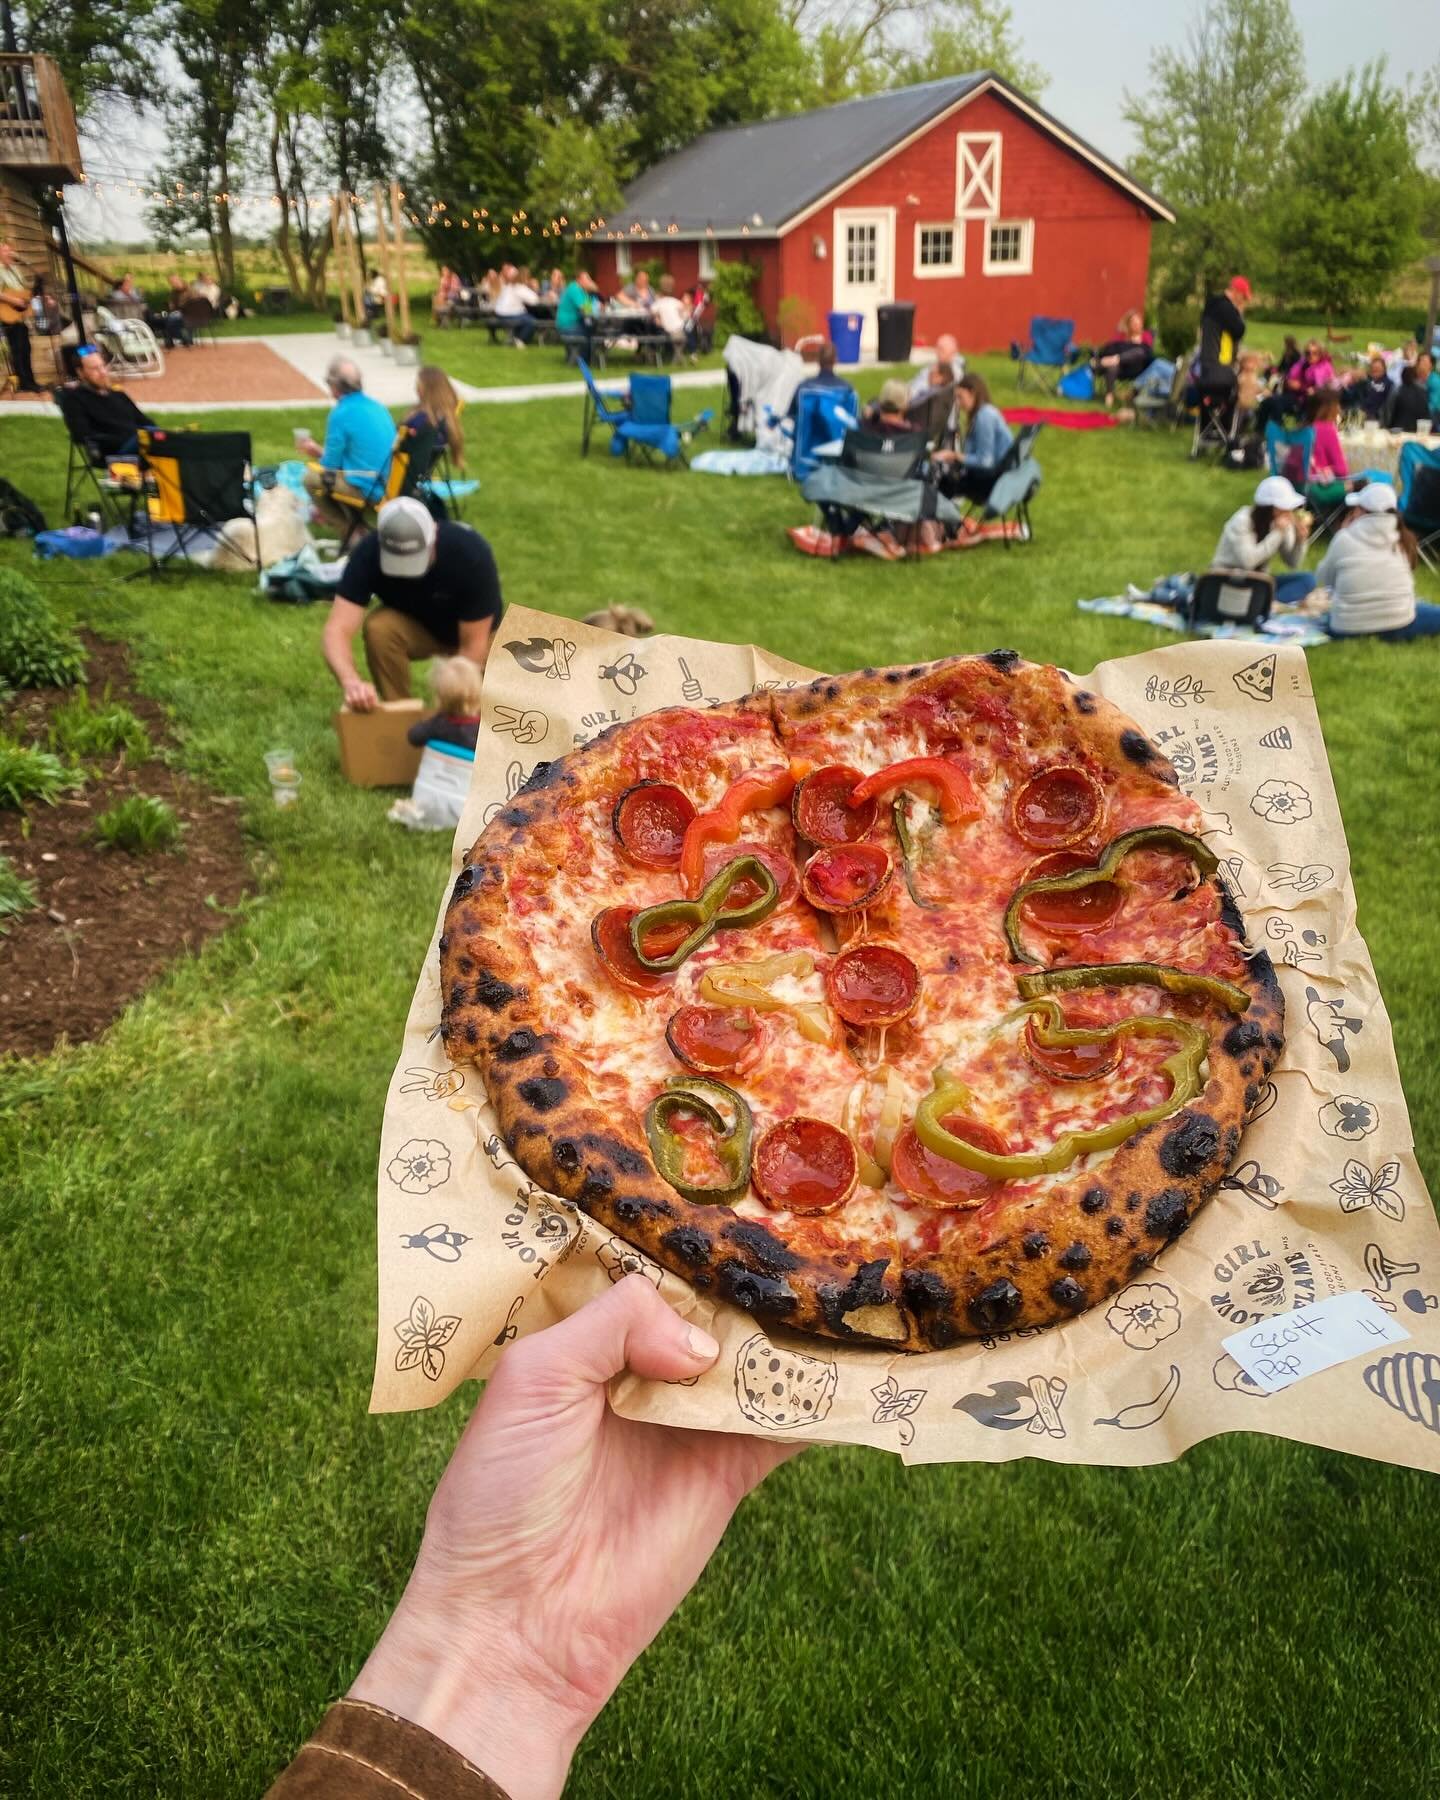 👩🏻&zwj;🌾 PIZZA FARM! 🚜💨🍕

We are 24 hours away from our first pizza farm @mapletonbarn with @everyonesicecream (SOLD OUT) 🥳

Do yourself a favor, pop over to Mapletons website and book yourself a rezzo. We&rsquo;re there almost every Thursday 